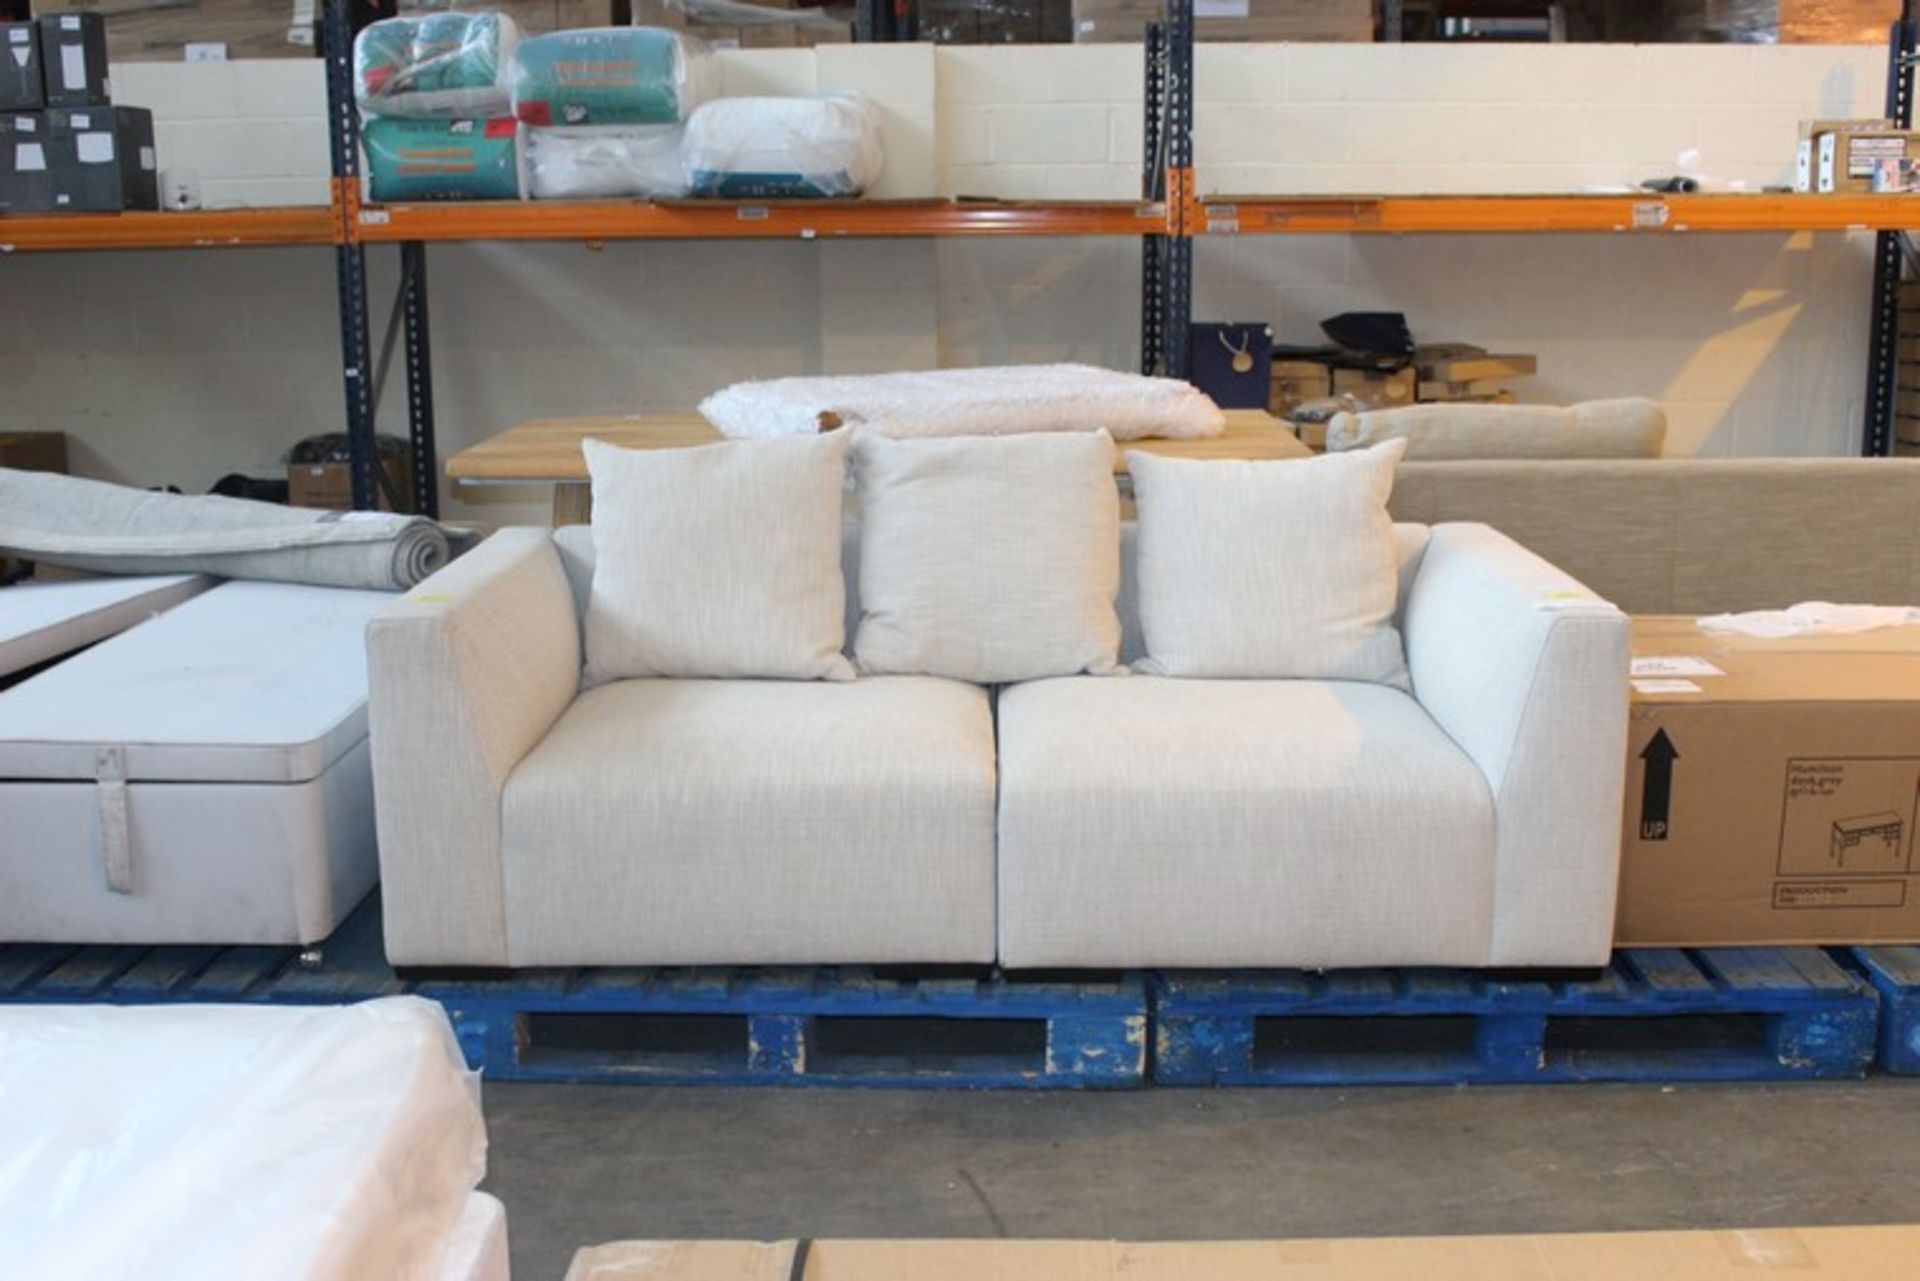 1 x TOKYO LARGE SOFA RRP £3000 (PART LOT ONLY) (09.10.17) (2371108) *PLEASE NOTE THAT THE BID